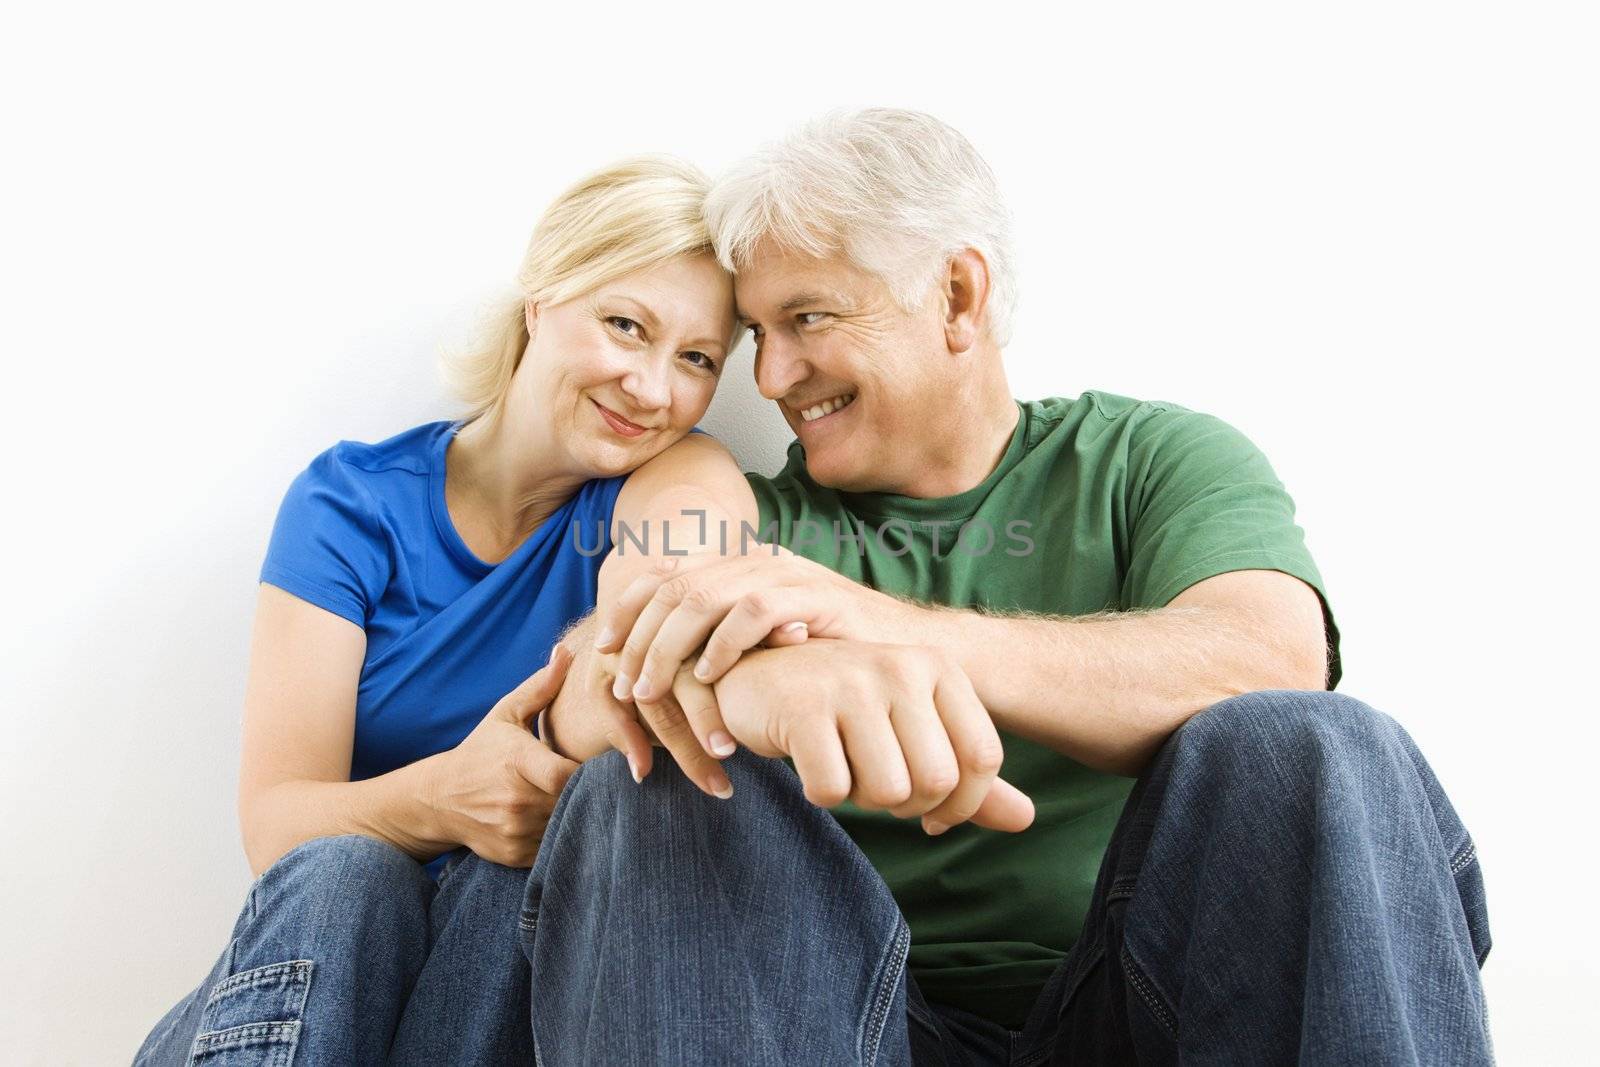 Middle-aged couple sitting together smiling.